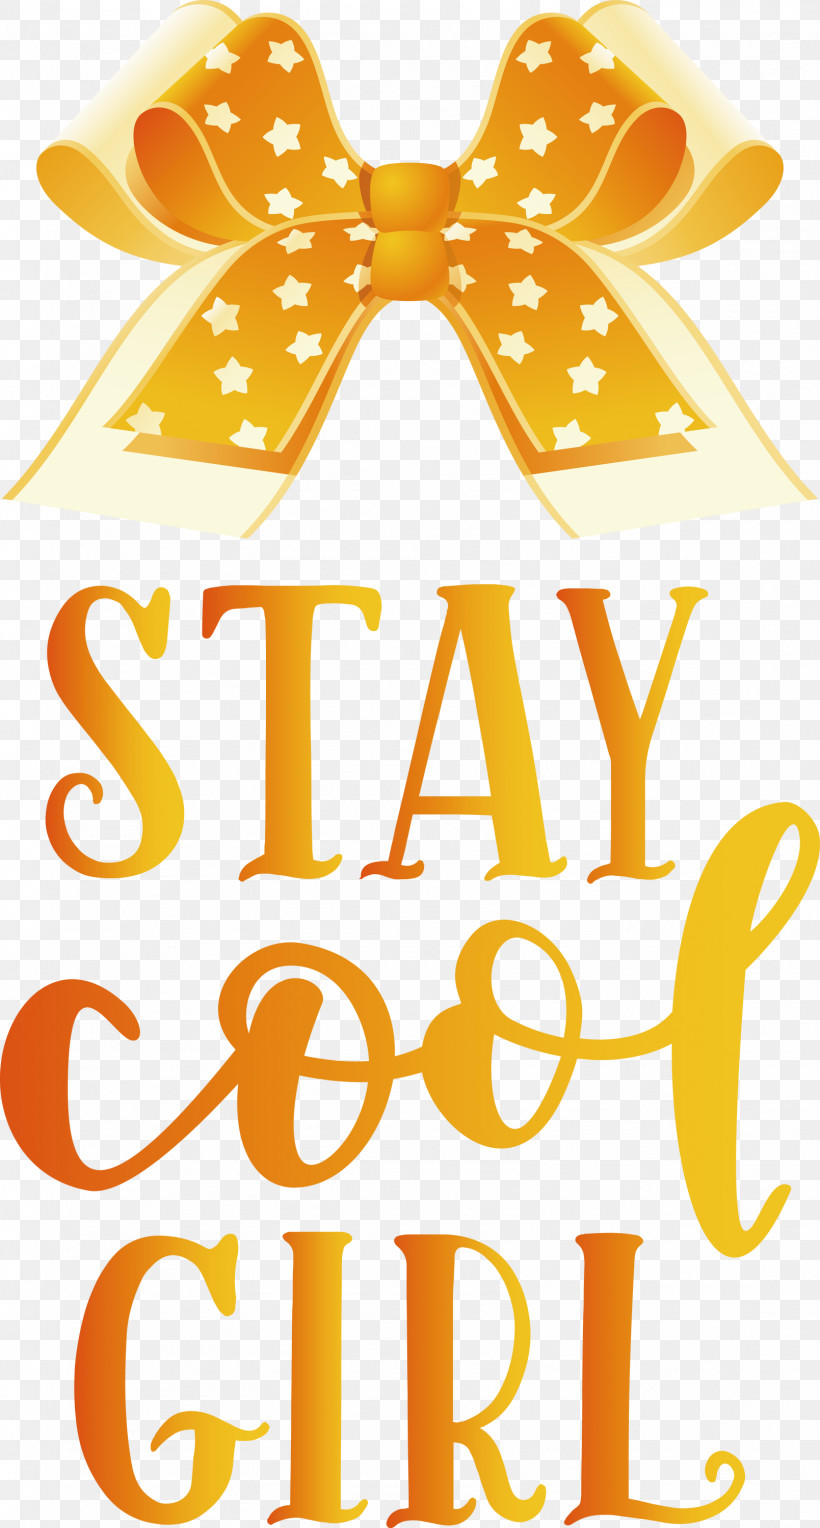 Stay Cool Girl Fashion Girl, PNG, 1609x3000px, Fashion, Girl, Line, Logo, Precalculus Download Free